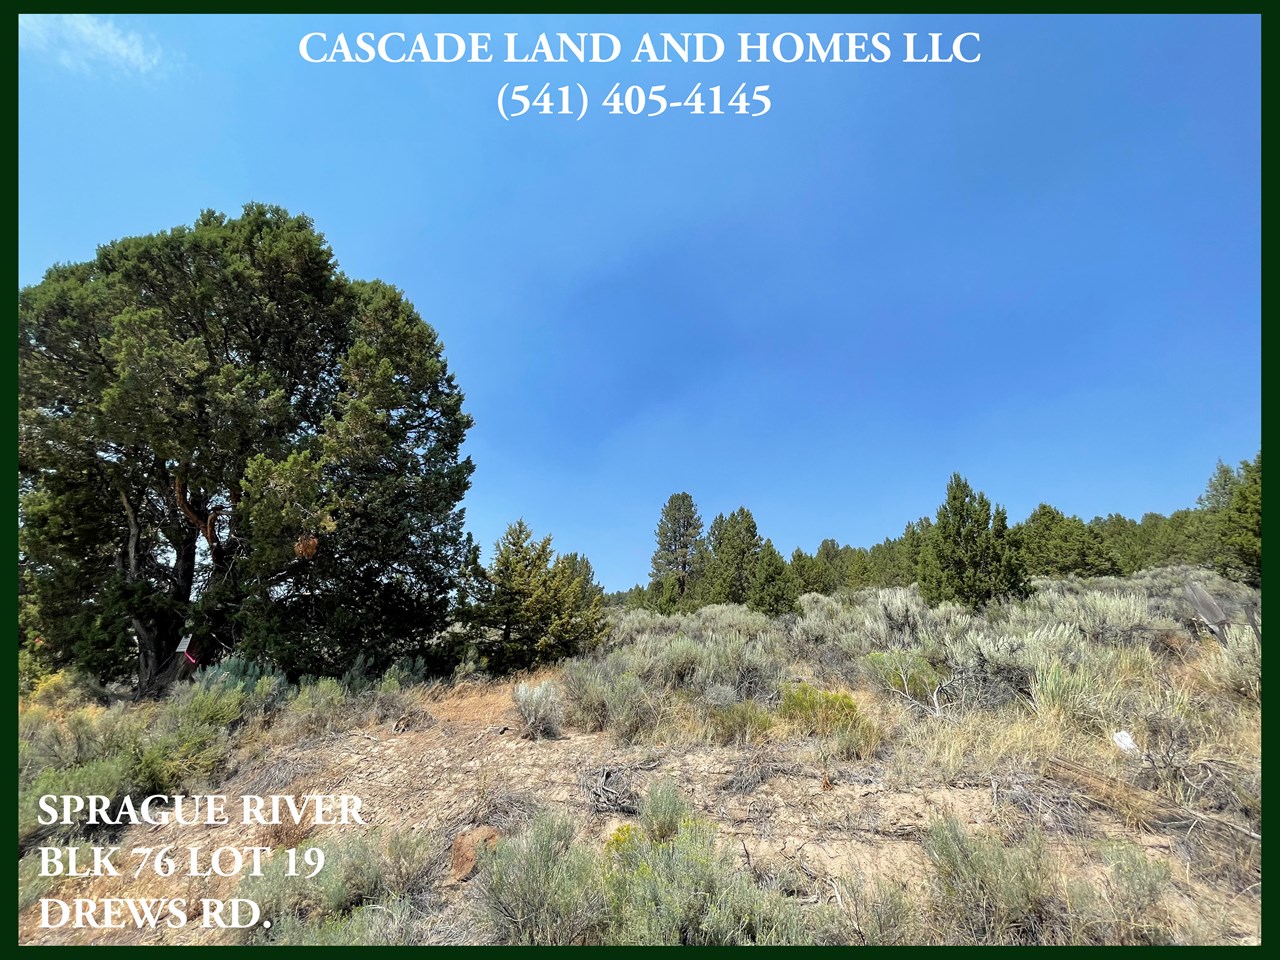 there are a few trees on the property, the rest is covered in sage, rabbit brush and native grasses. the  area is considered high desert and the soil in the area is volcanic with choptie loam.